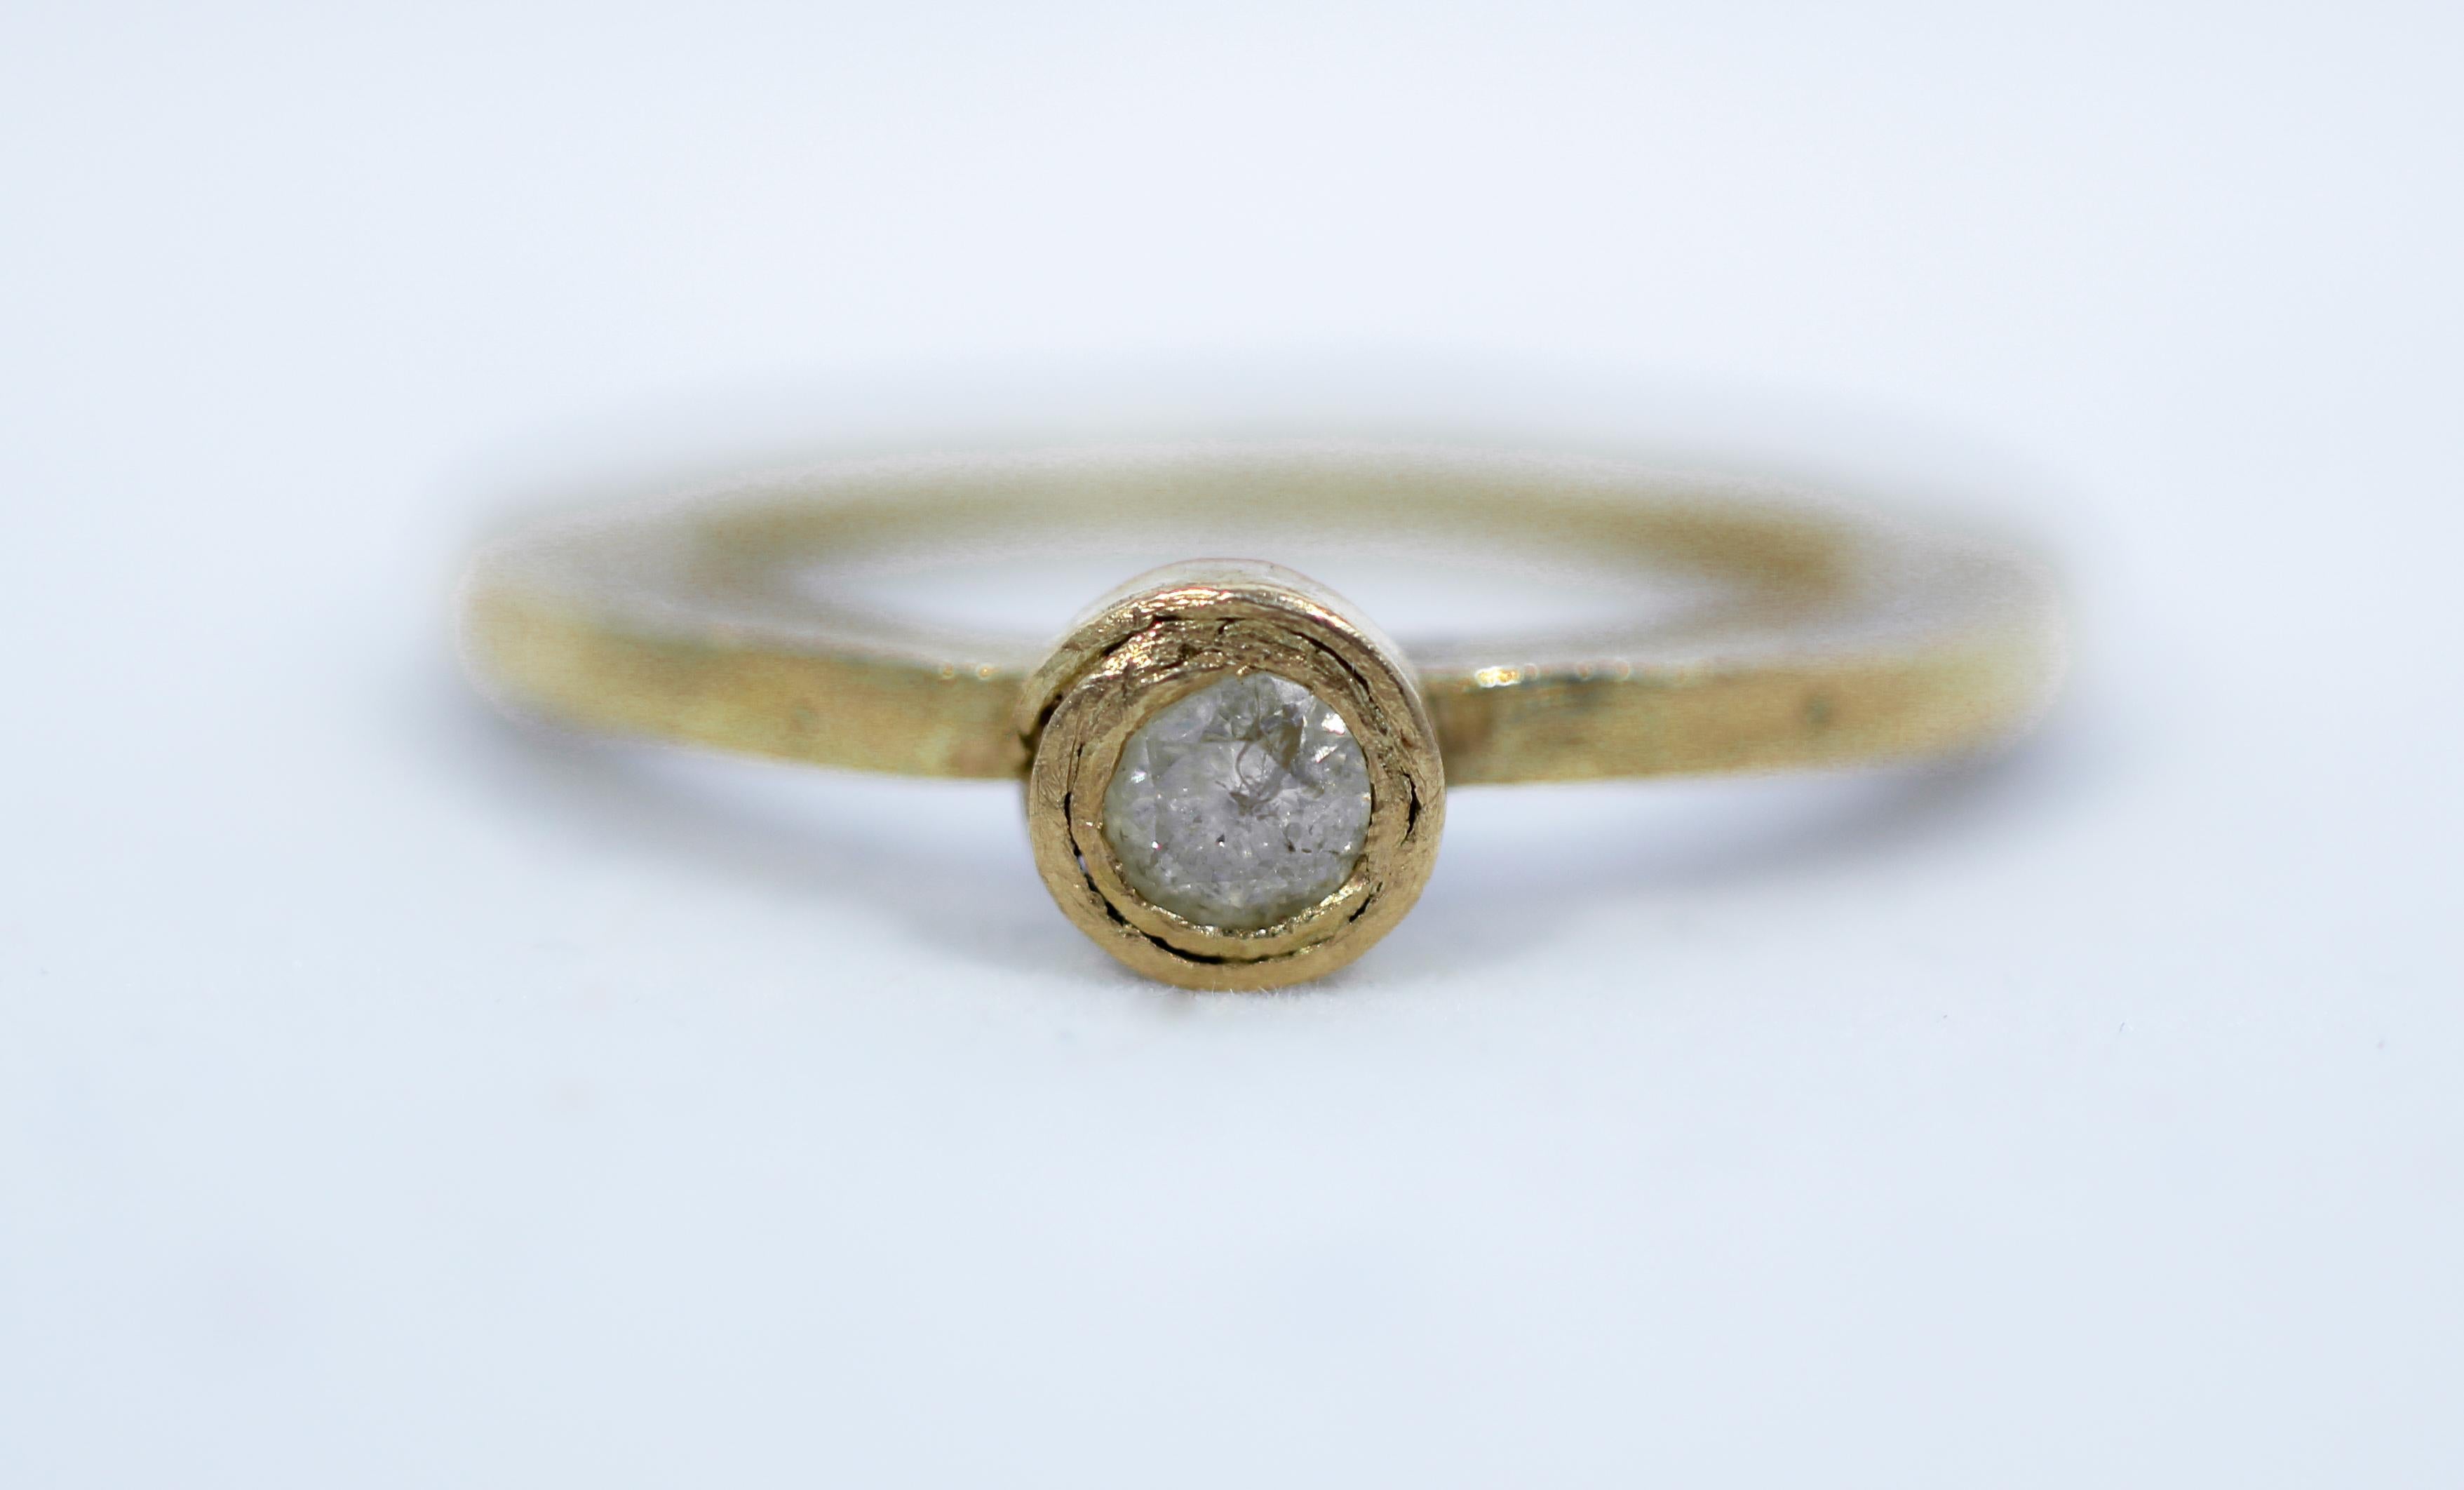 .22Ct yellow diamond set in recycled 18K gold in this alternative engagement bridal ring. Sputnik, Simplicity series contemporary design by AB Jewelry NYC. An Alternative Engagement or Bridal handmade ring in recycled 18k gold with a .22ct sparkling